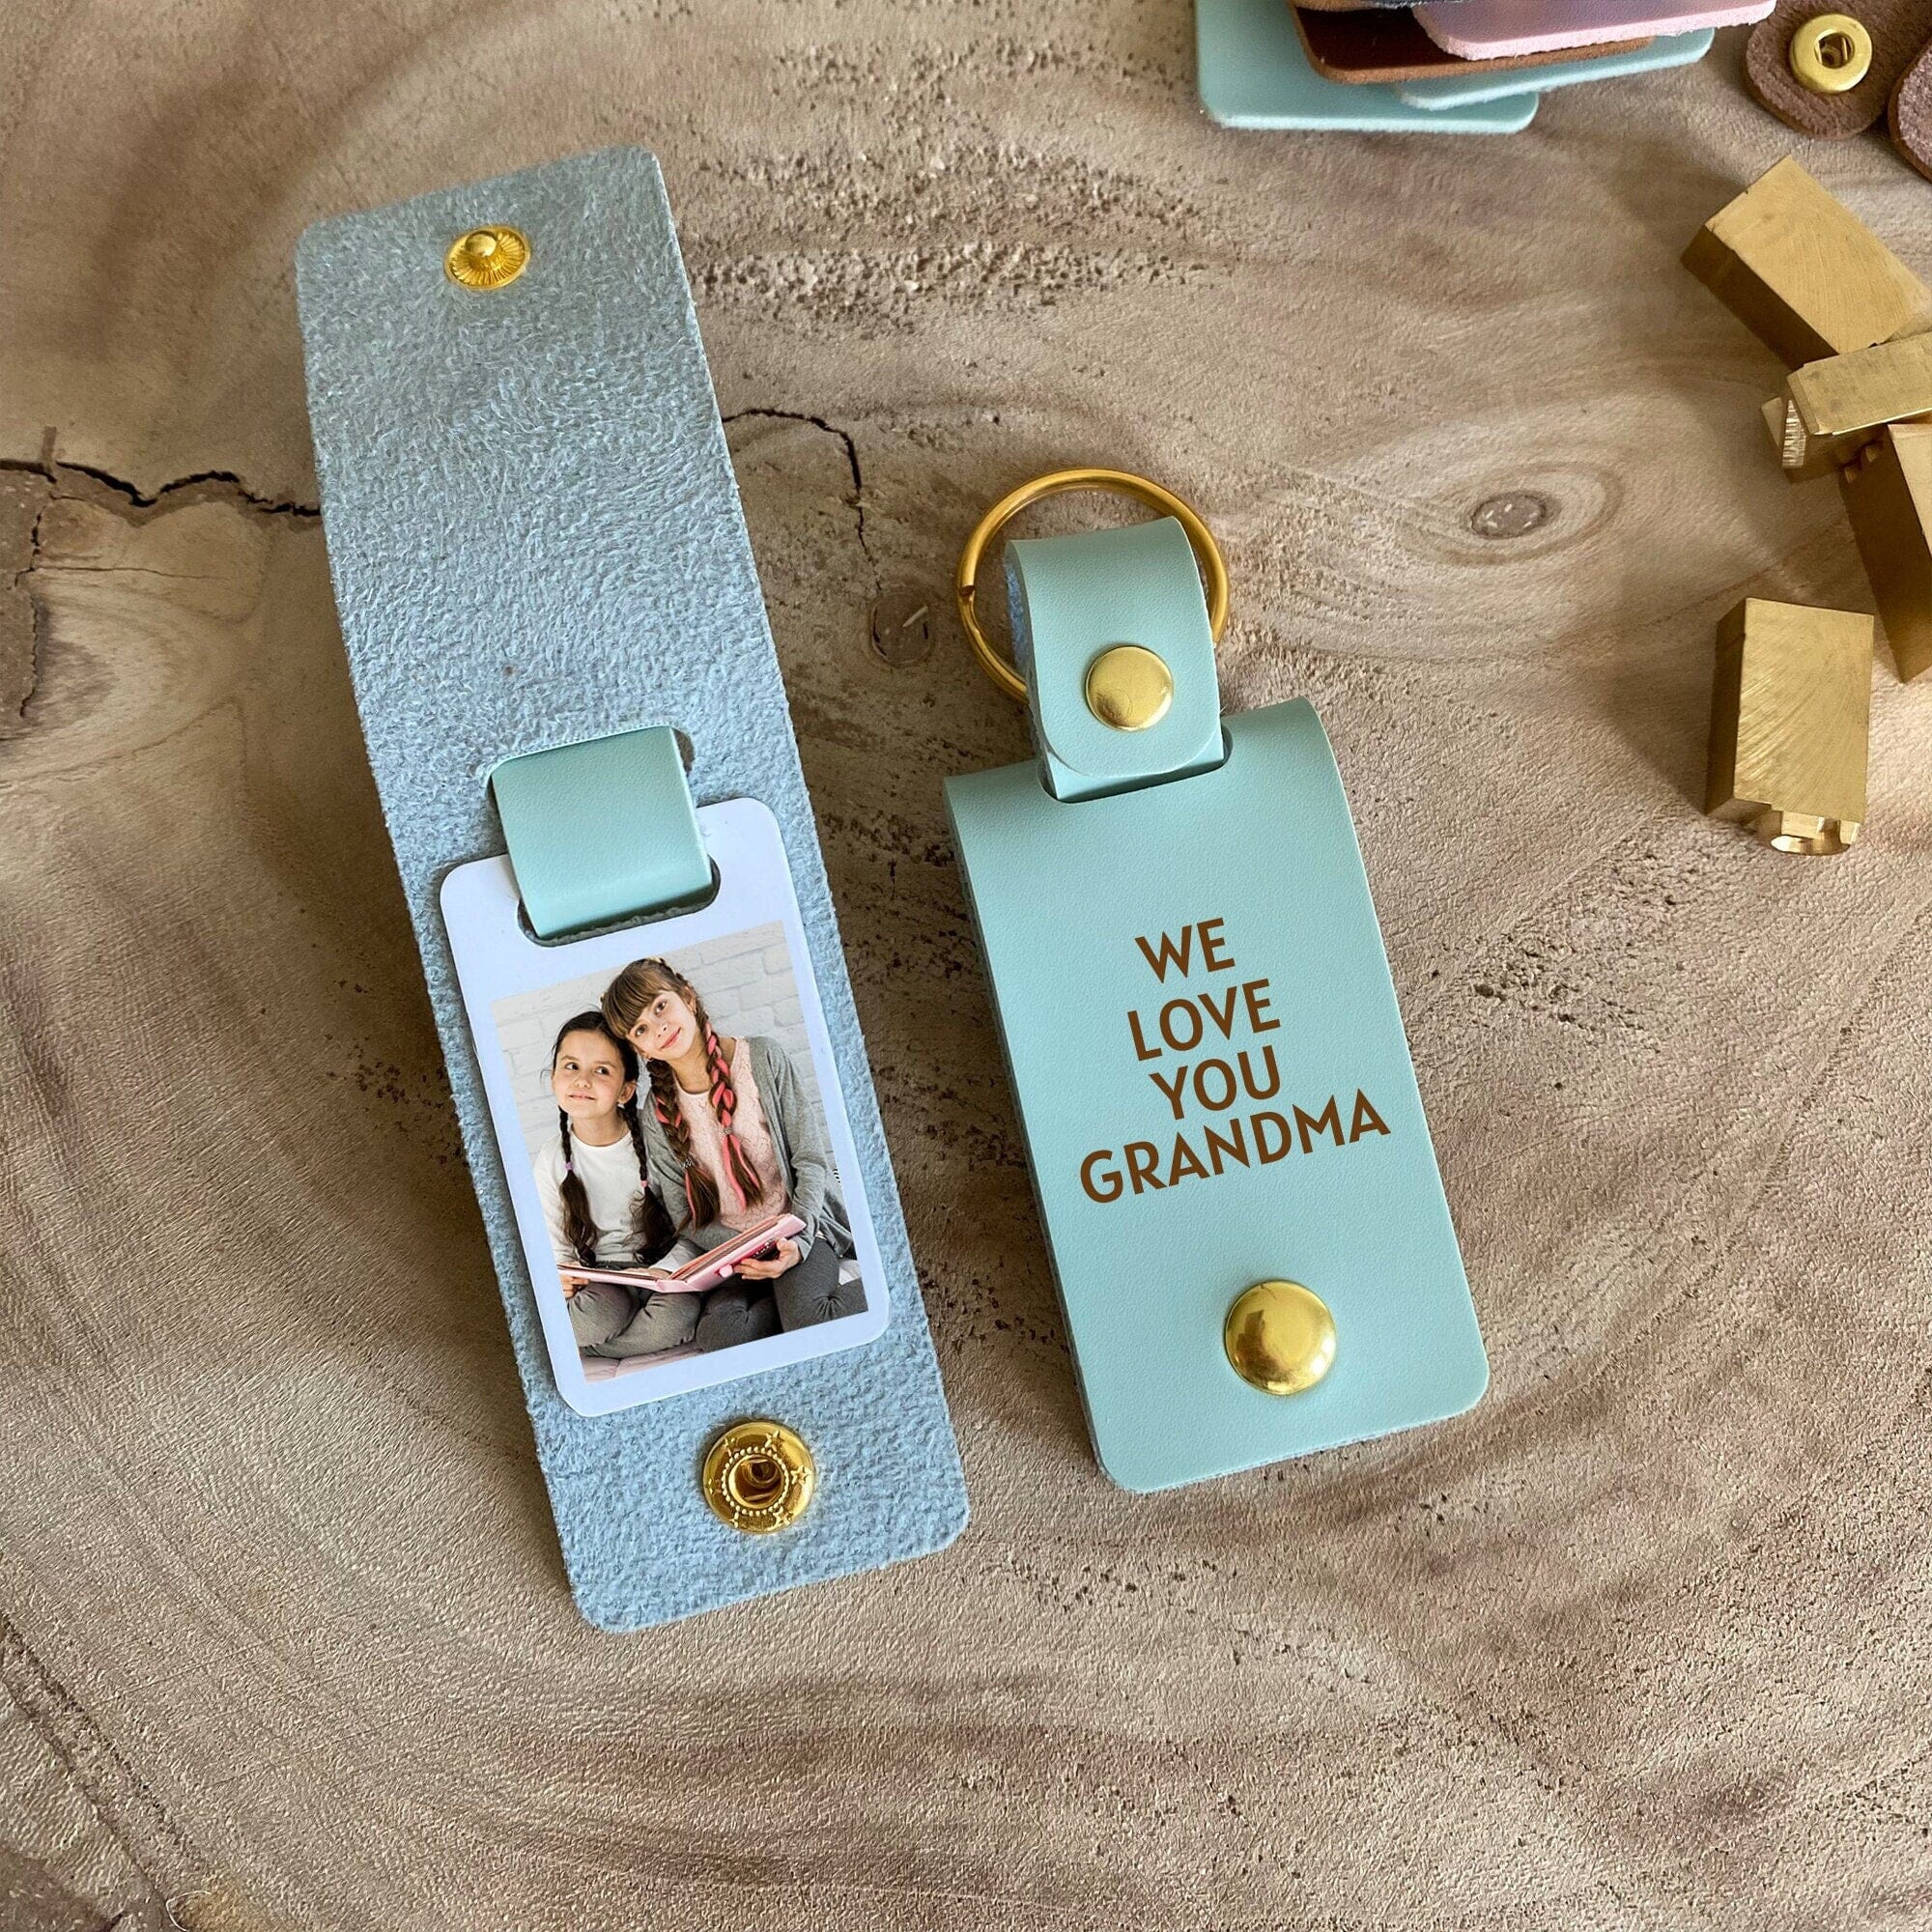 We love you dad photo keyring, Available for mum daddy grandad uncle, Father's Day Keychain gift for him